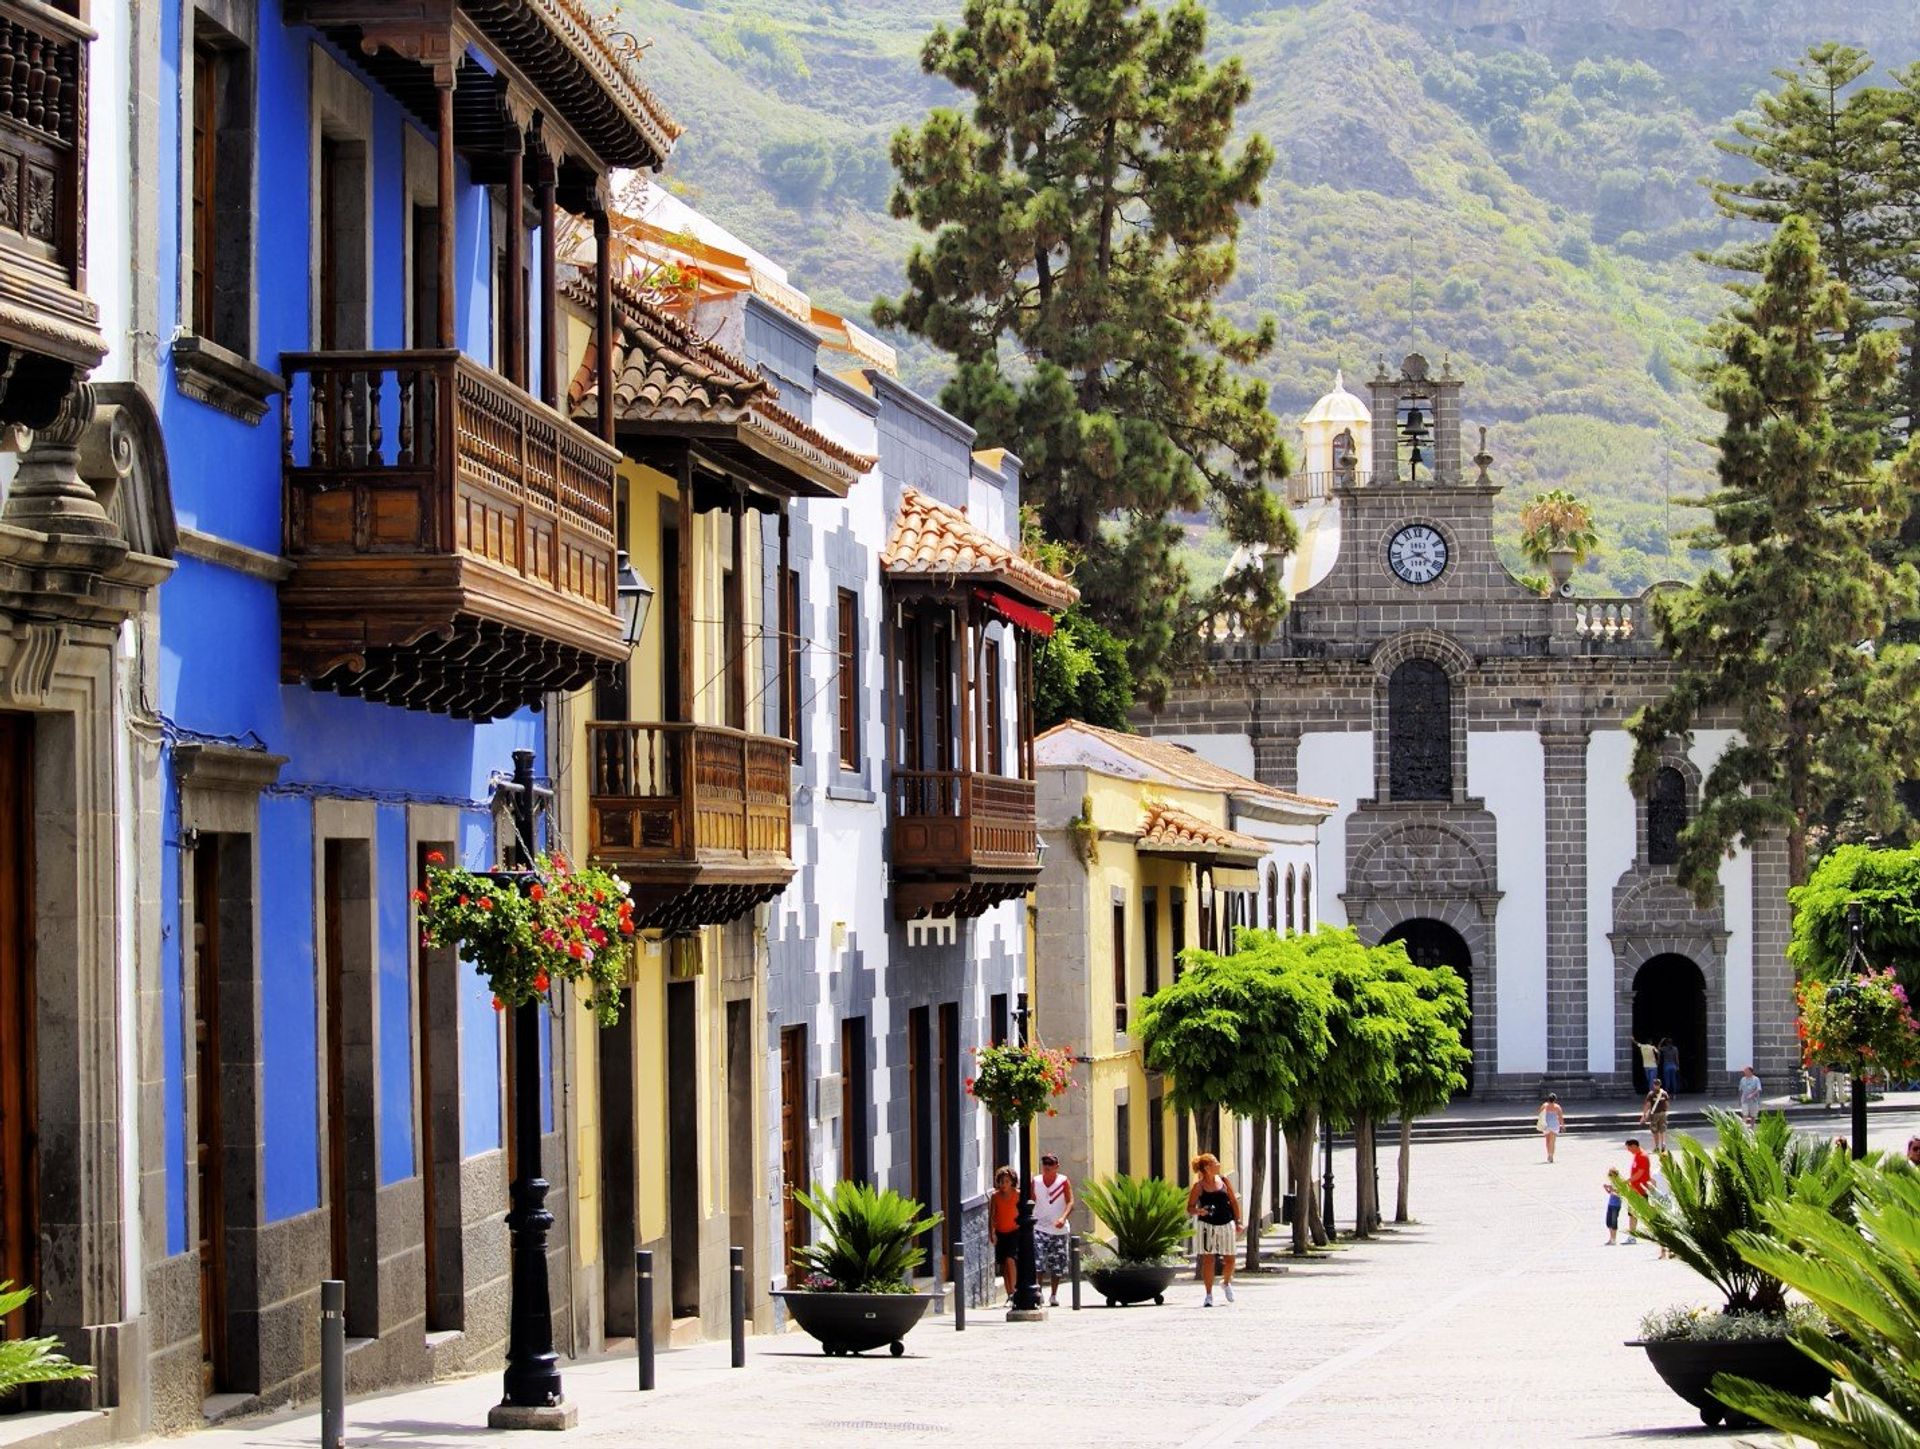 The charming cobbled streets of the old town Teror, some 10km southwest of Las Palmas